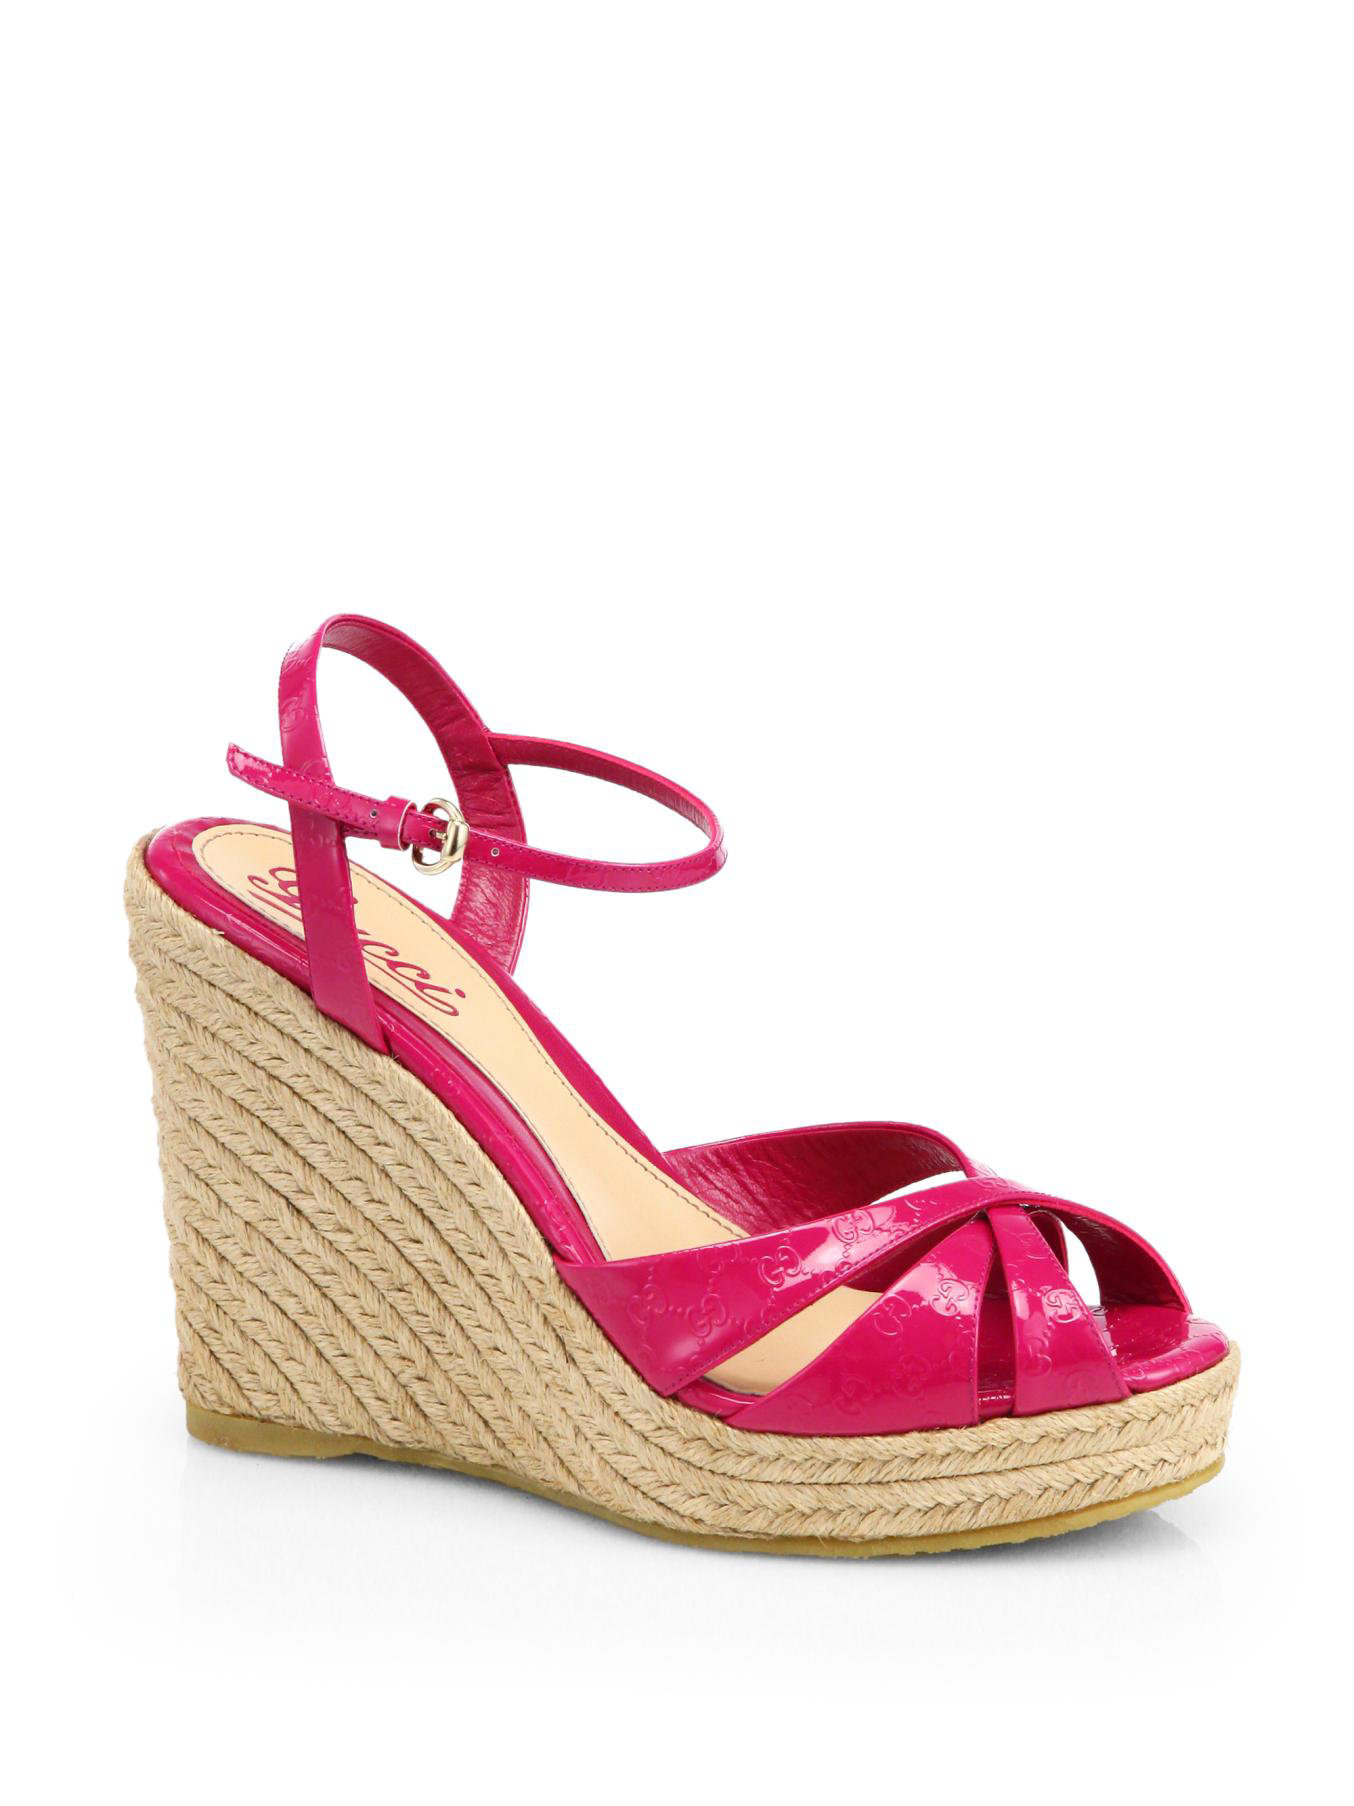 Lyst - Gucci Penelope Logo Patent Leather Espadrille Wedge Sandals in Pink